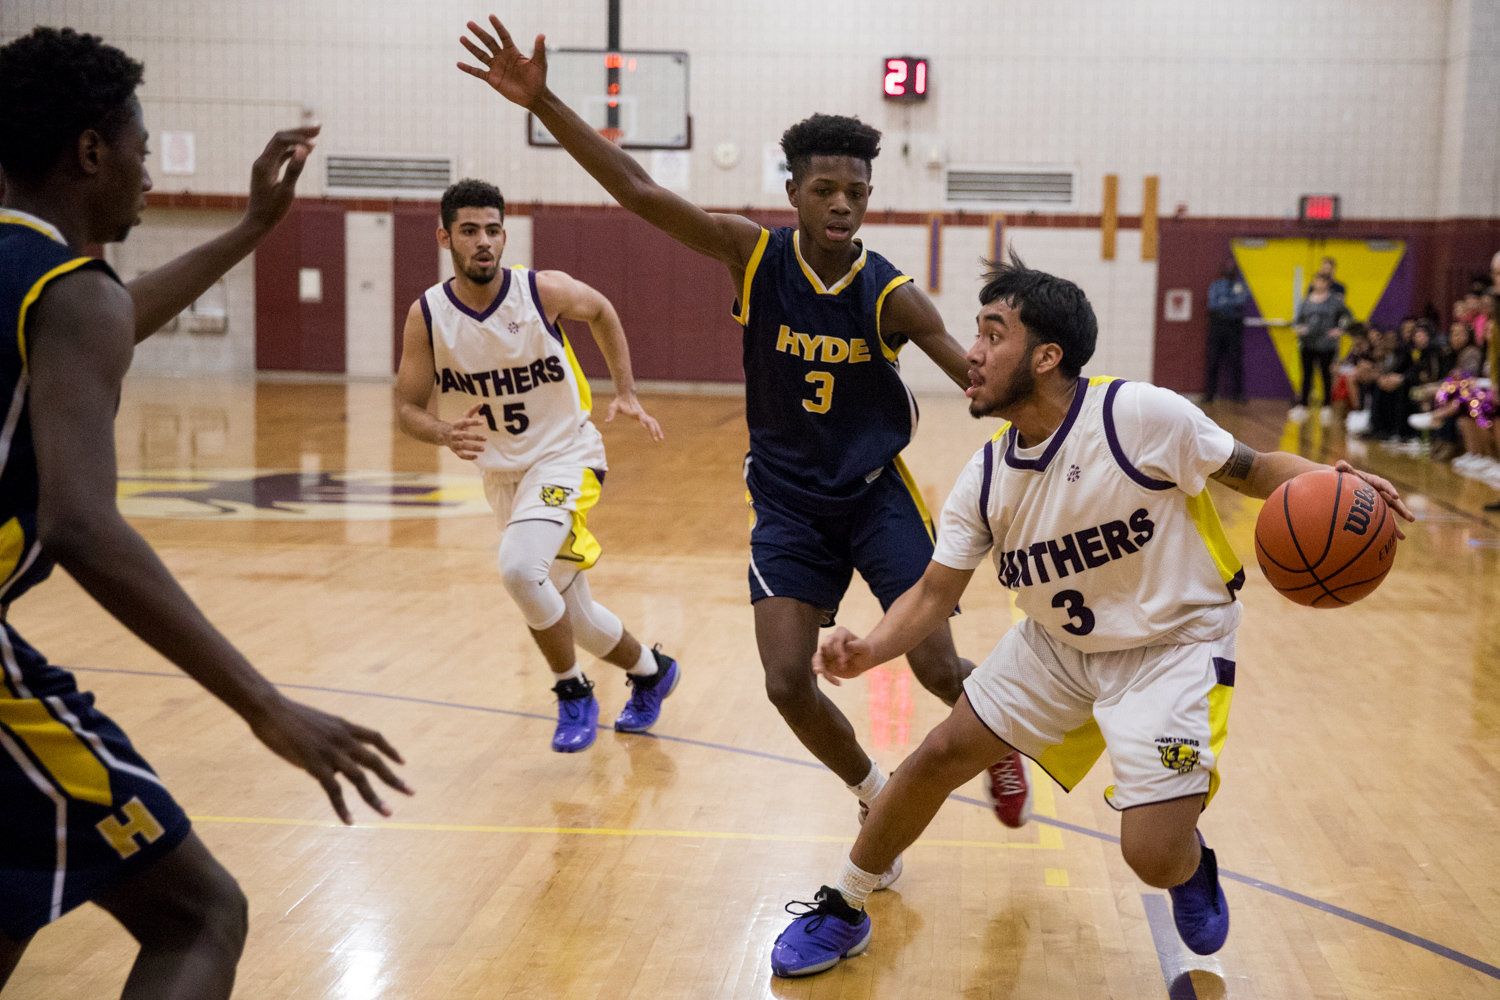 IN-Tech Academy senior guard Joel Jimenez scored 10 points in his final home game, a playoff win over Hyde. But his season — and career — came to an end with a second-round playoff loss at Scholars Academy.